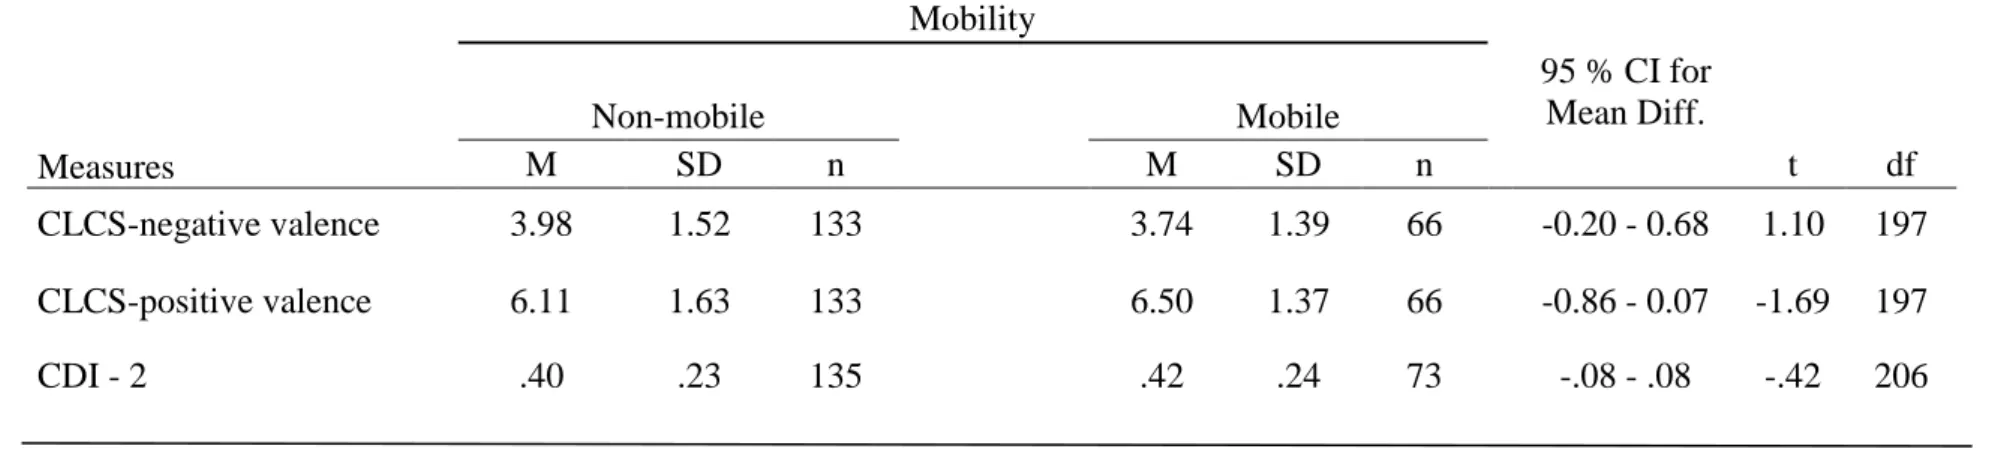 Table 3.7 Results of t-test and Descriptive Statistics for CLCS Scores and CDI – 2 Total by Mobility in Last Five Years  Mobility  95 % CI for  Mean Diff